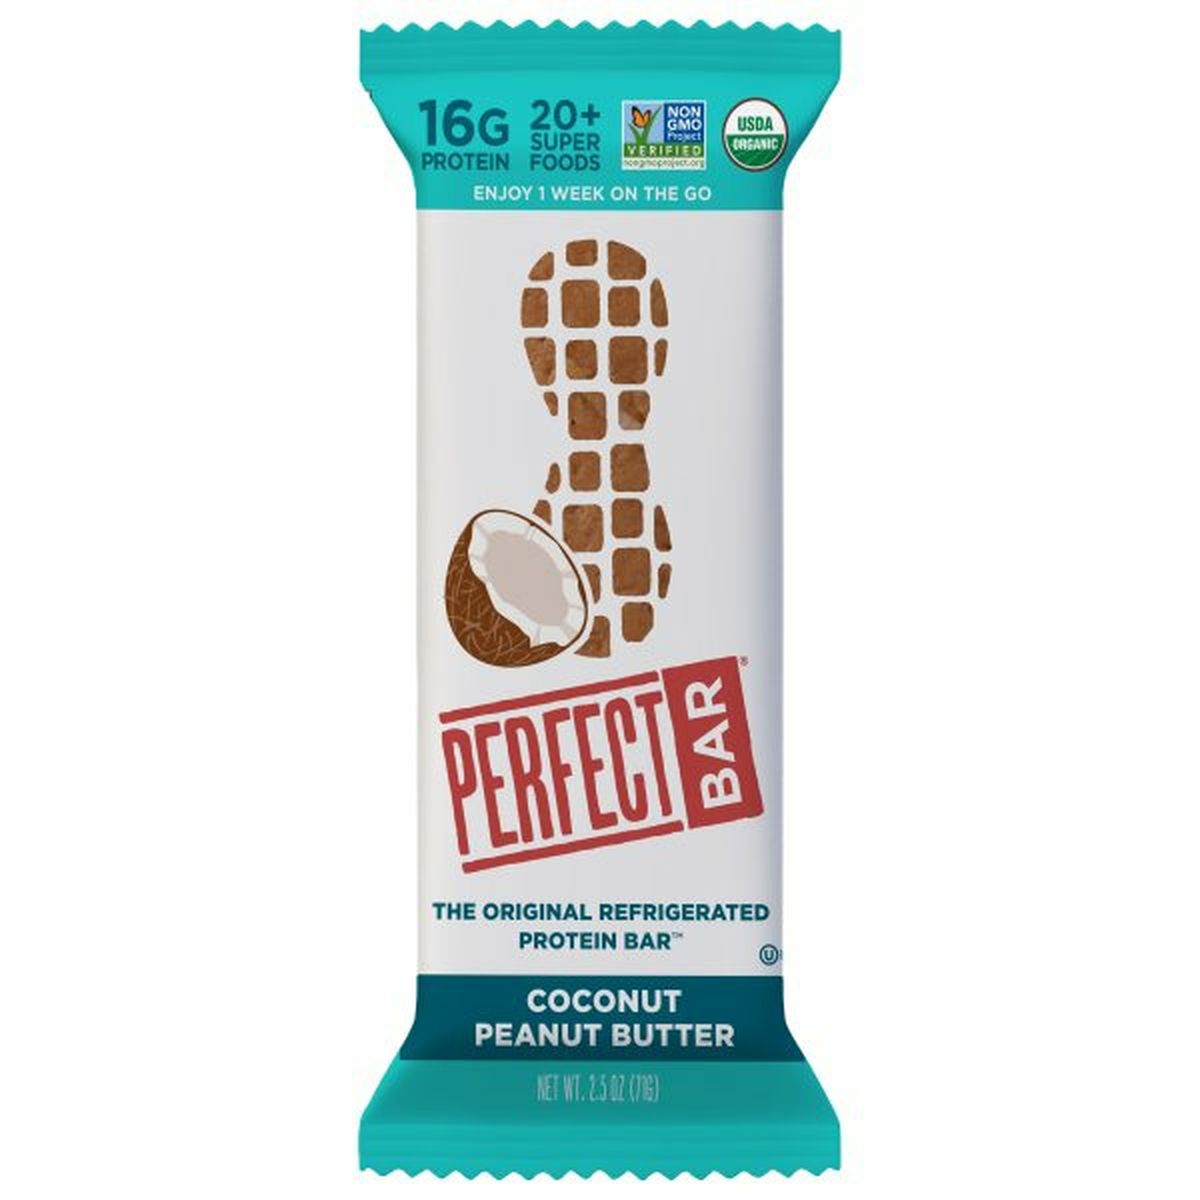 Calories in Perfect Bar Protein Bar, Coconut Peanut Butter